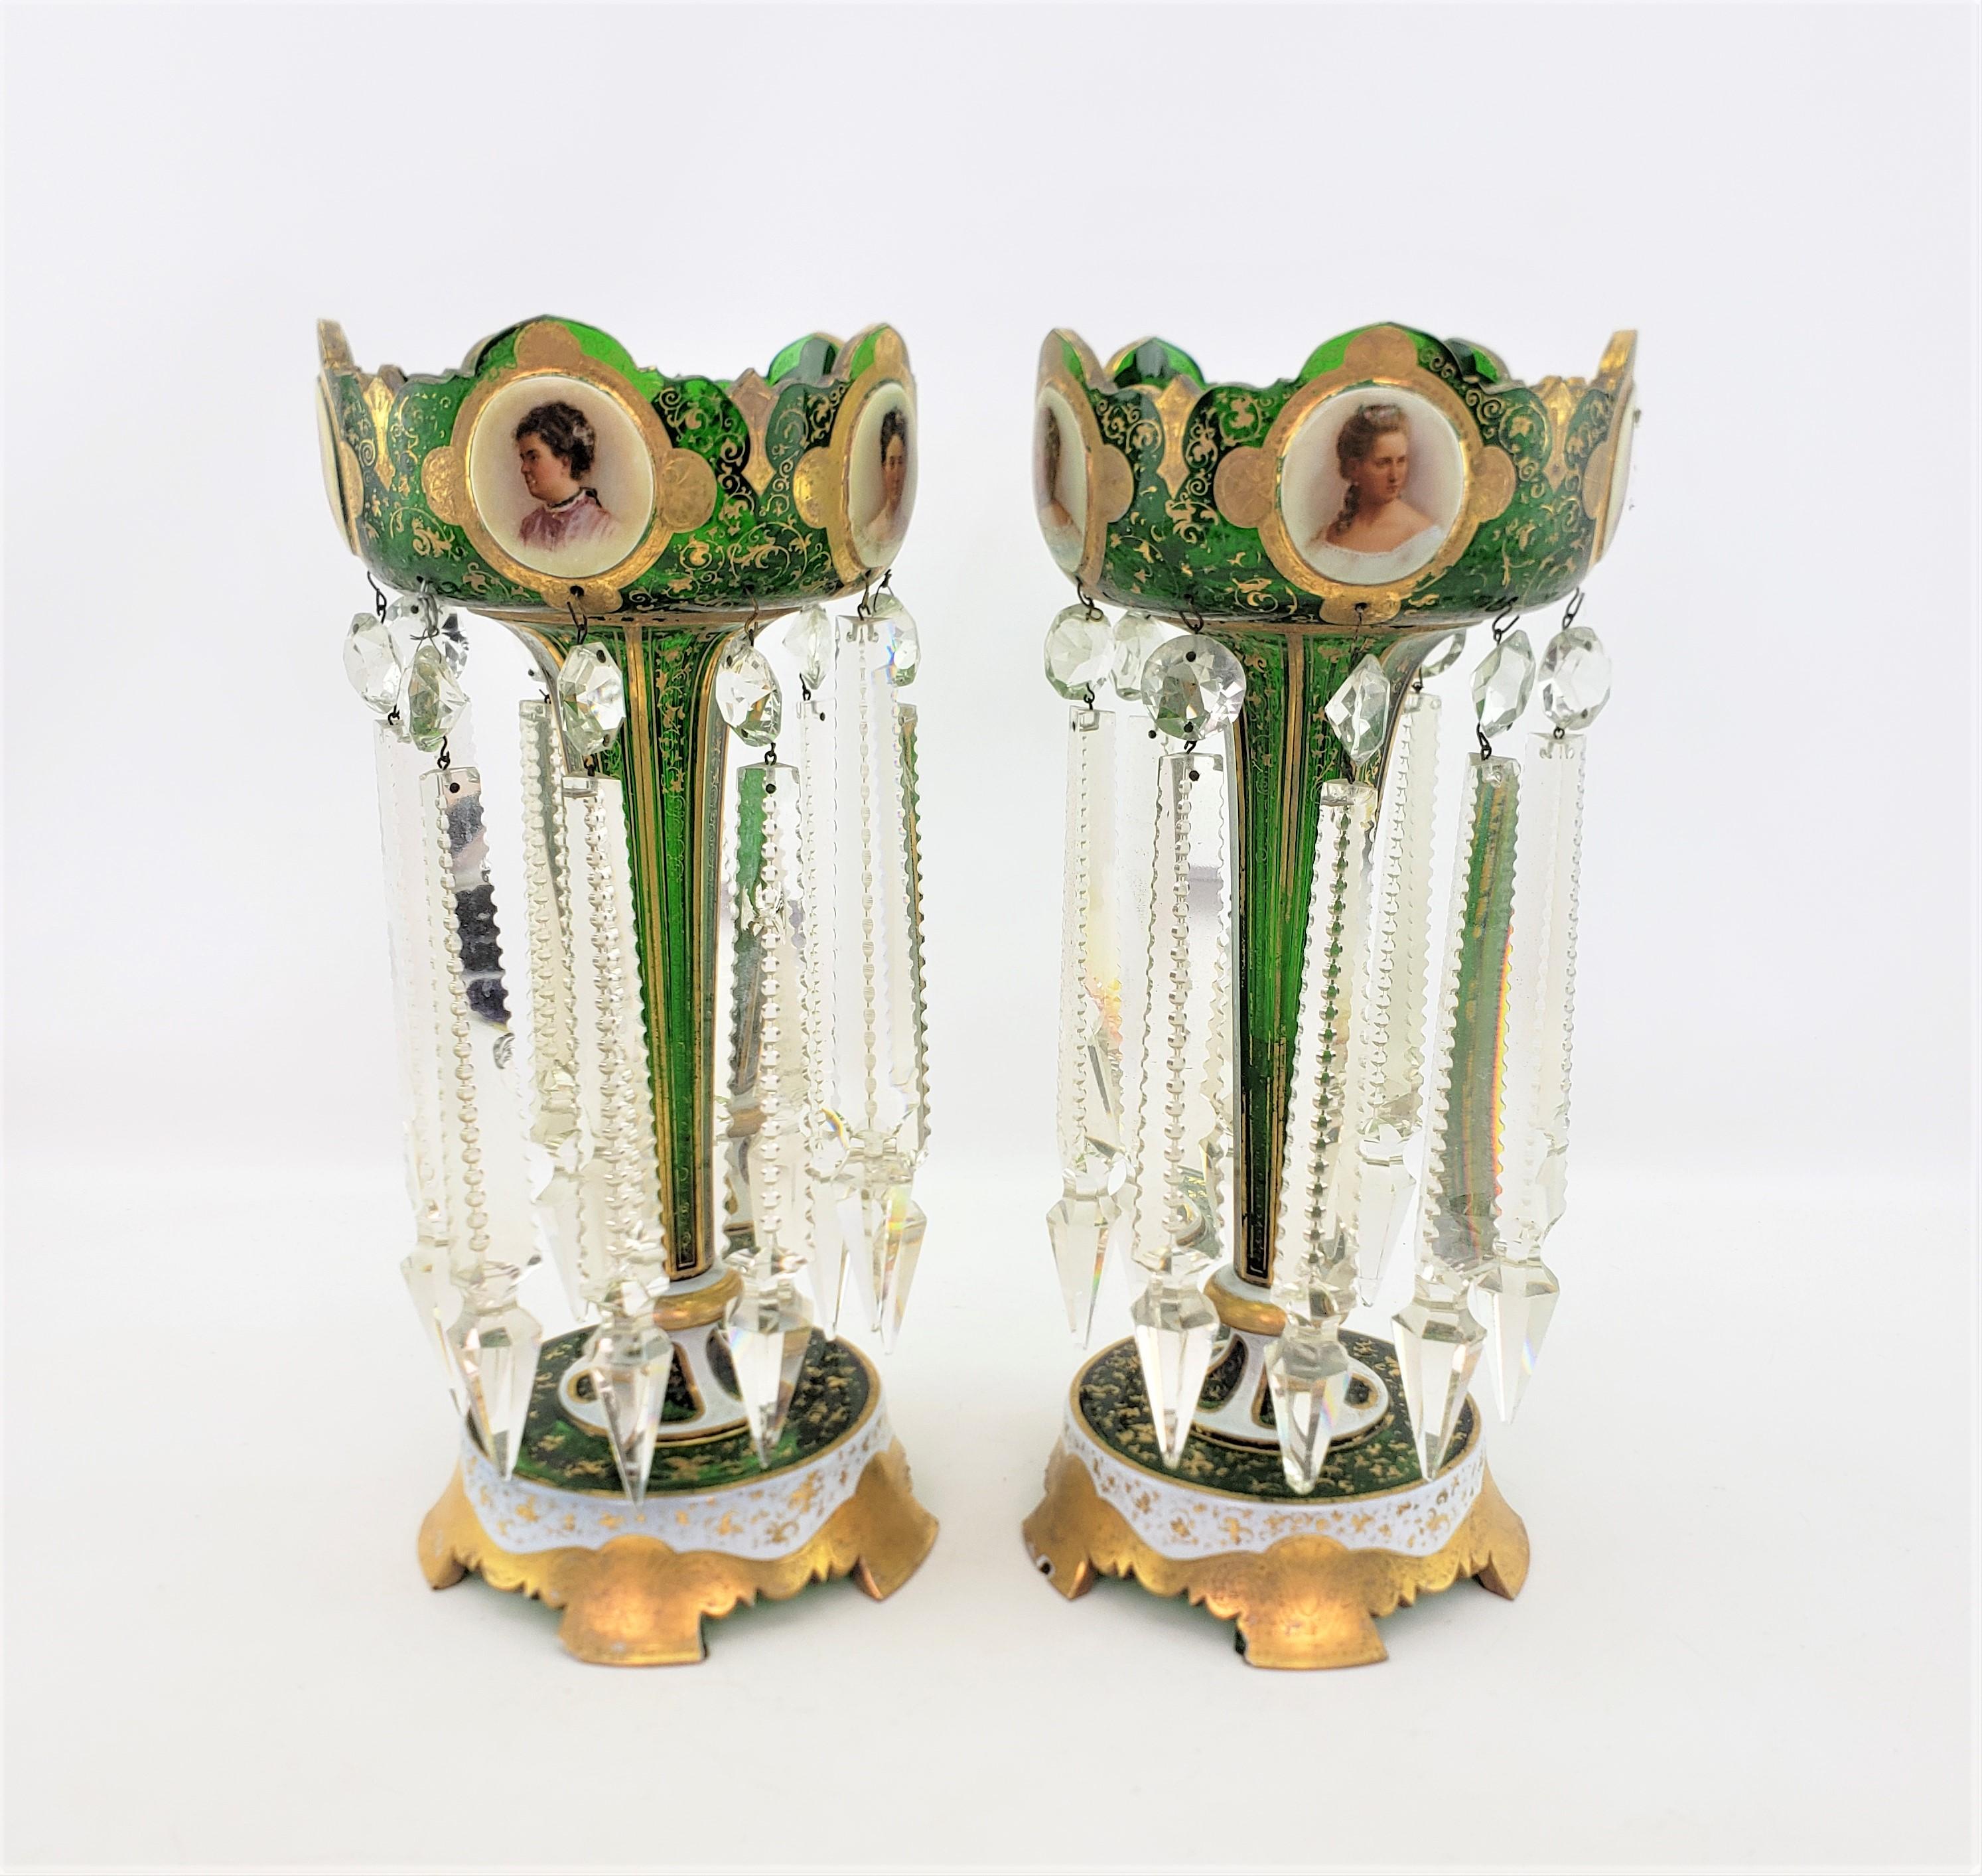 This pair of antique pedestal vases or lusters are unsigned, but presumed to have originated from the Czech Republic and date to approximately 1880 and done in the period Victorian style. The lusters are done with a deep green cut crystal with